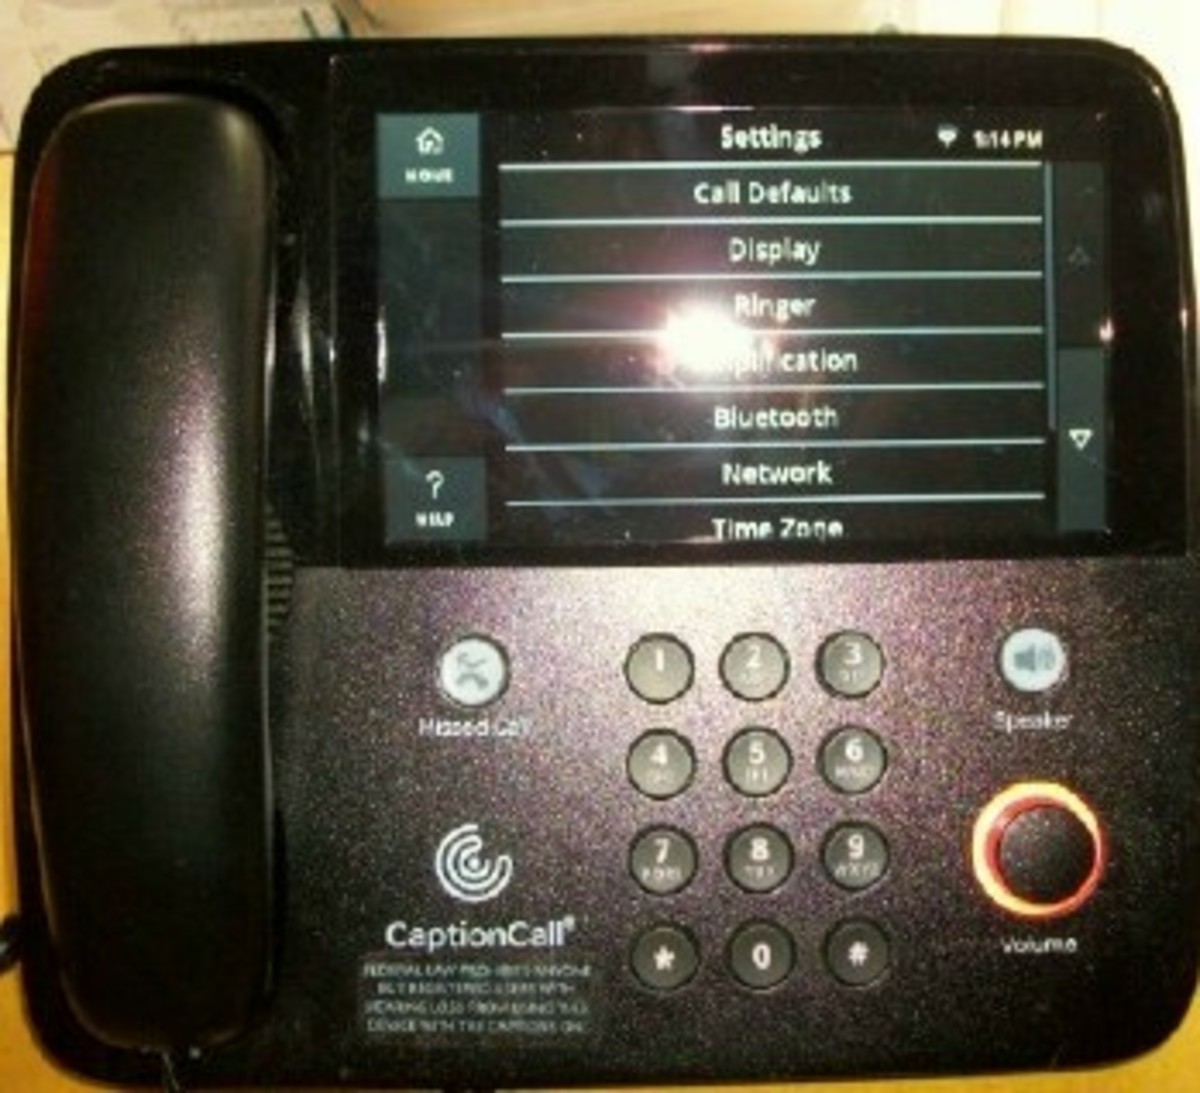 A caption phone that puts the words on a screen for the hearing disabled to be able to read. This helps the hearing disability to have better phone converesations